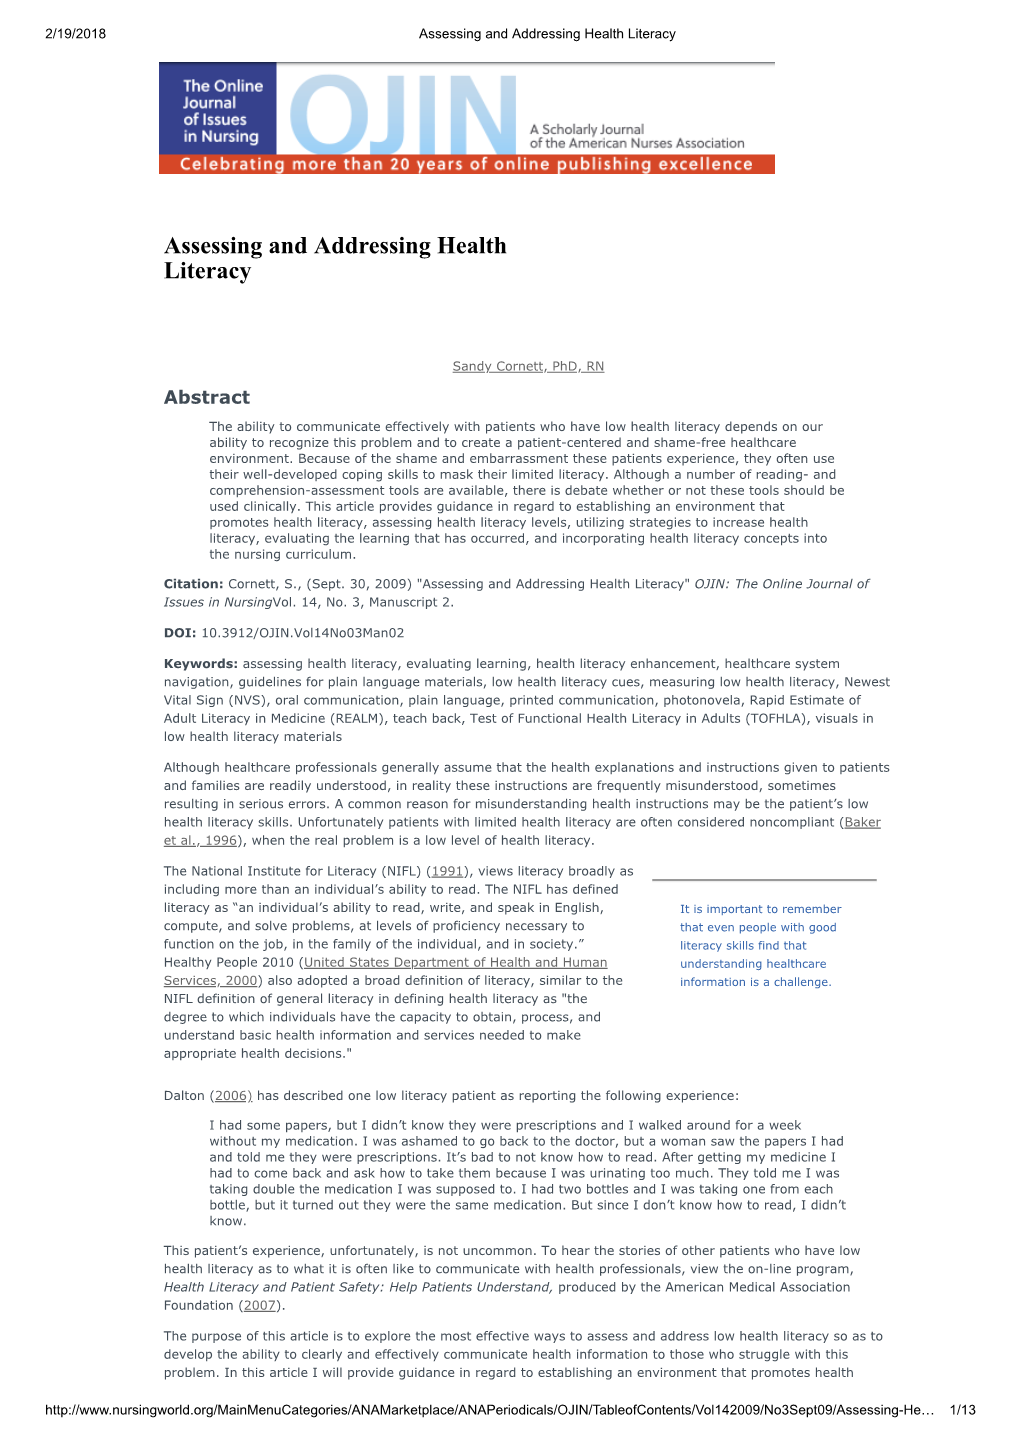 Assessing and Addressing Health Literacy